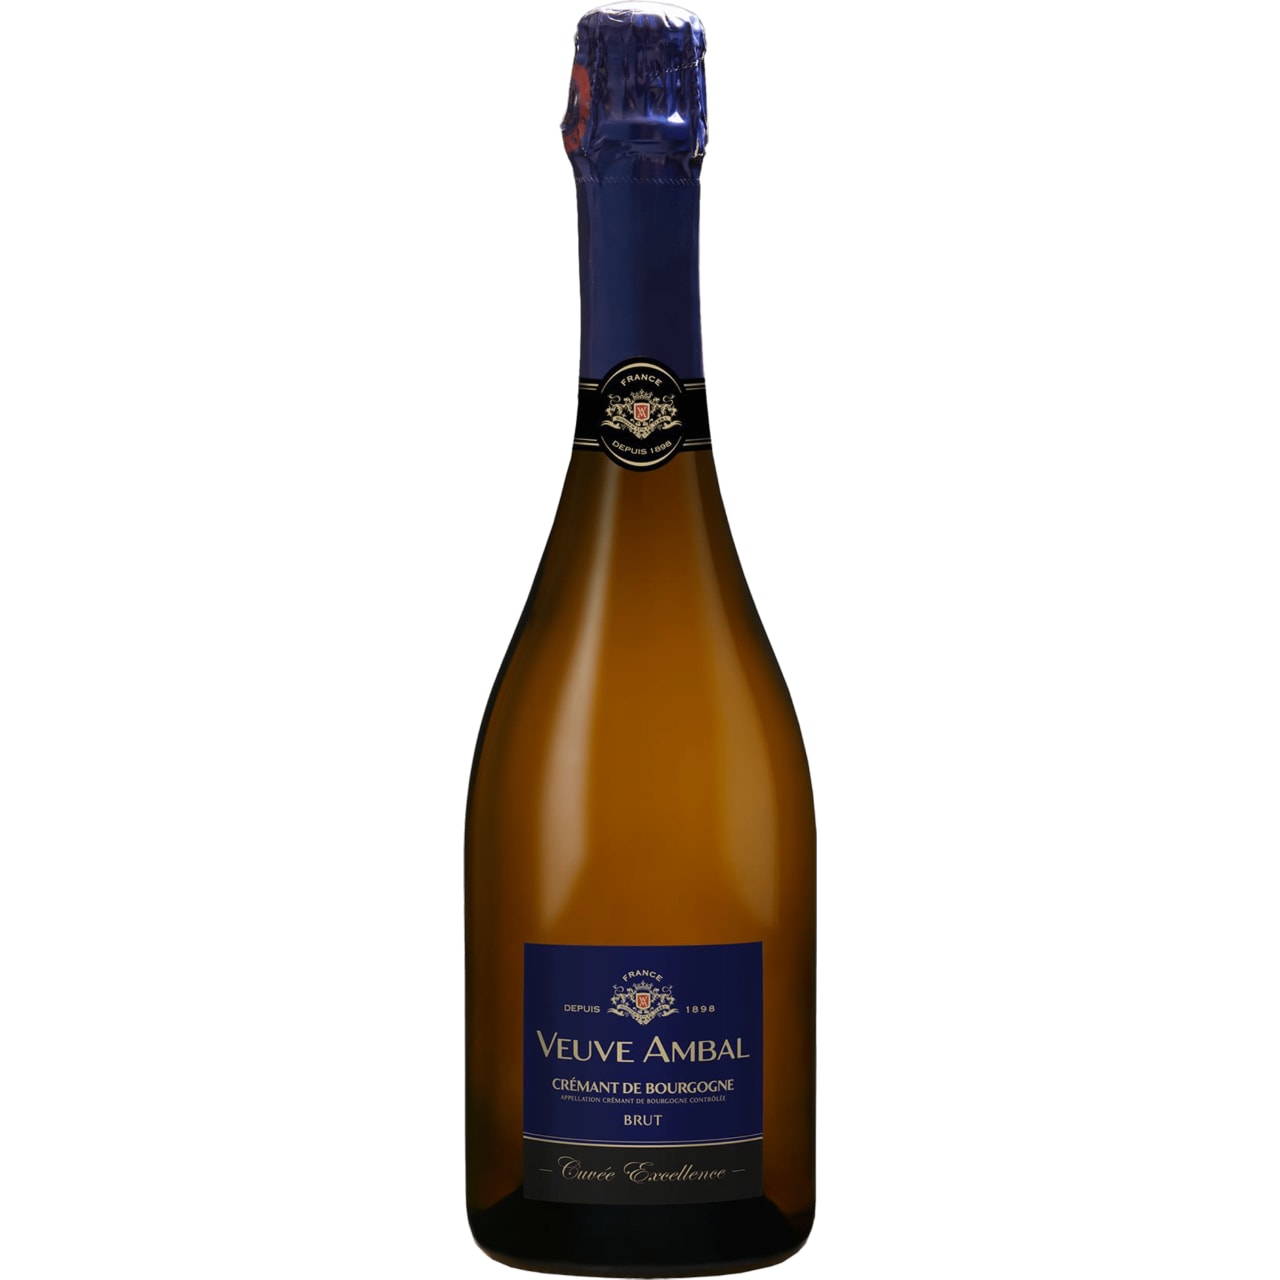 This Crémant de Bourgogne is emphasised by its golden yellow hue and fine bubbles. The harmonious and fruity palate reveals notes of exotic fruits.